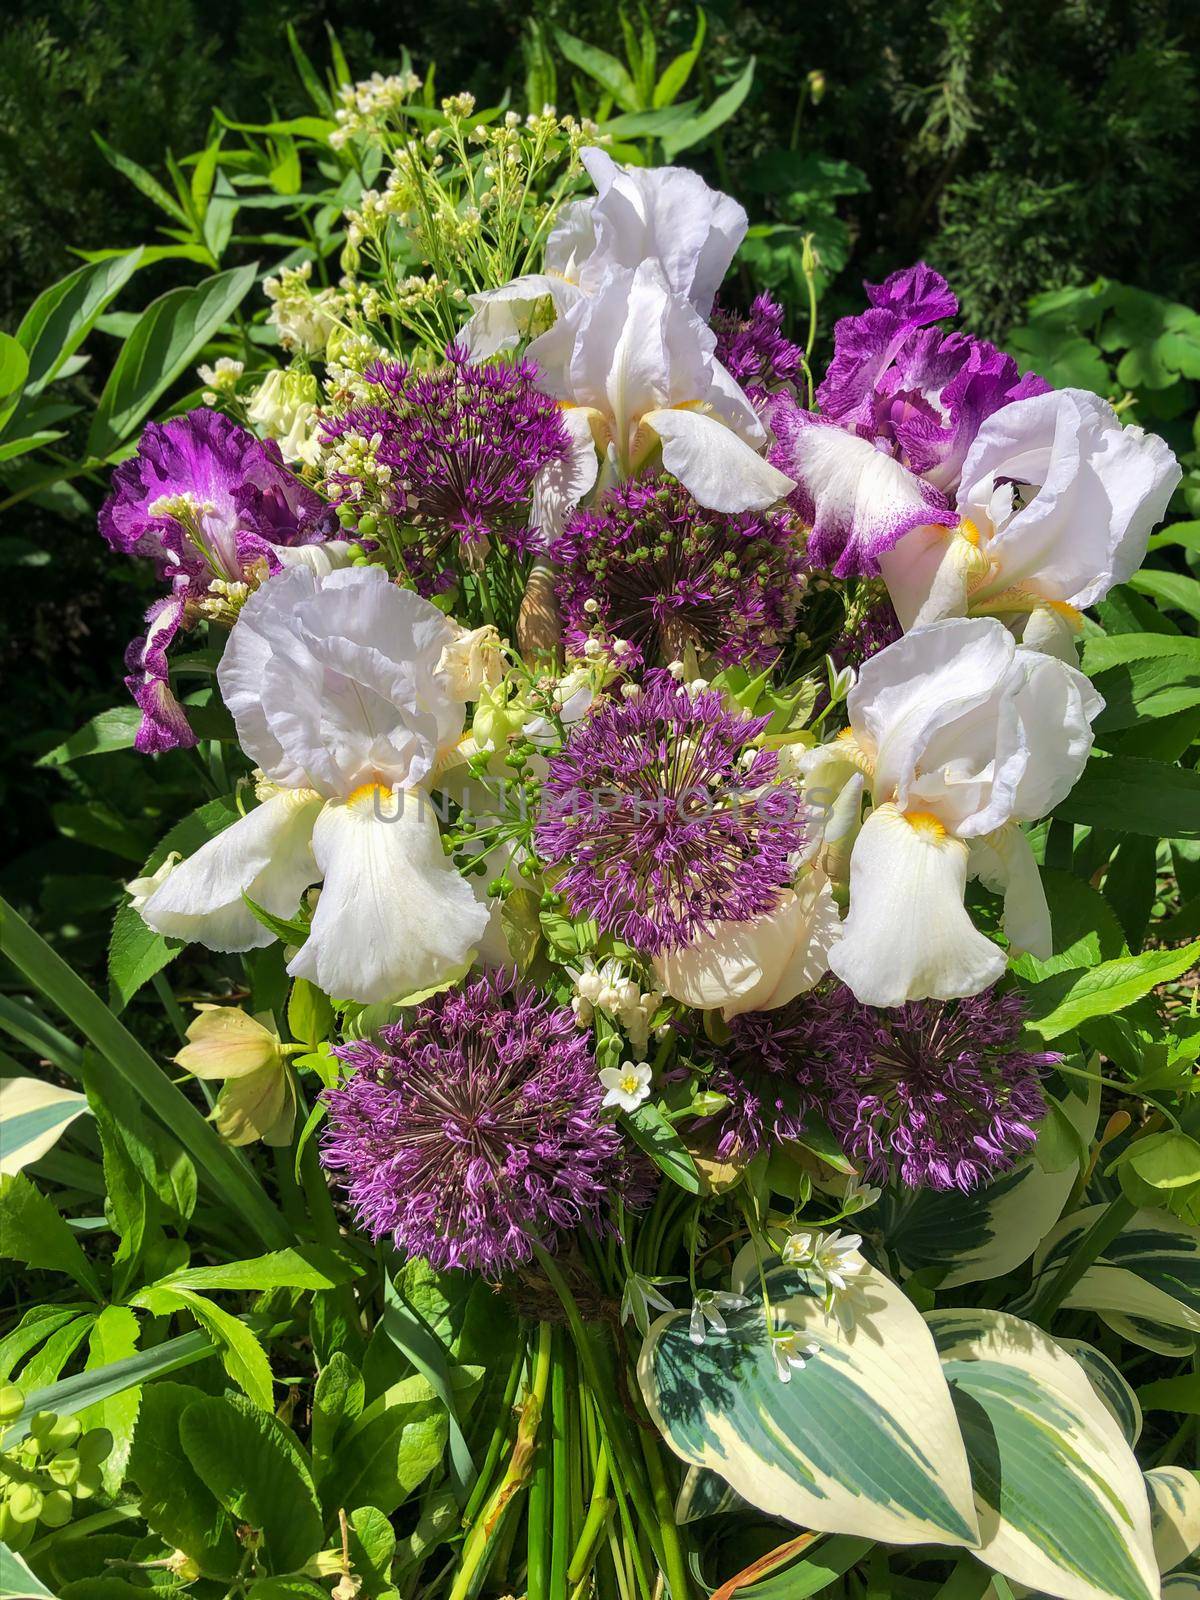 Romantic bouquets of flowers. Home decor and flowers arranging. Bouquet with irises and aliums in the garden.